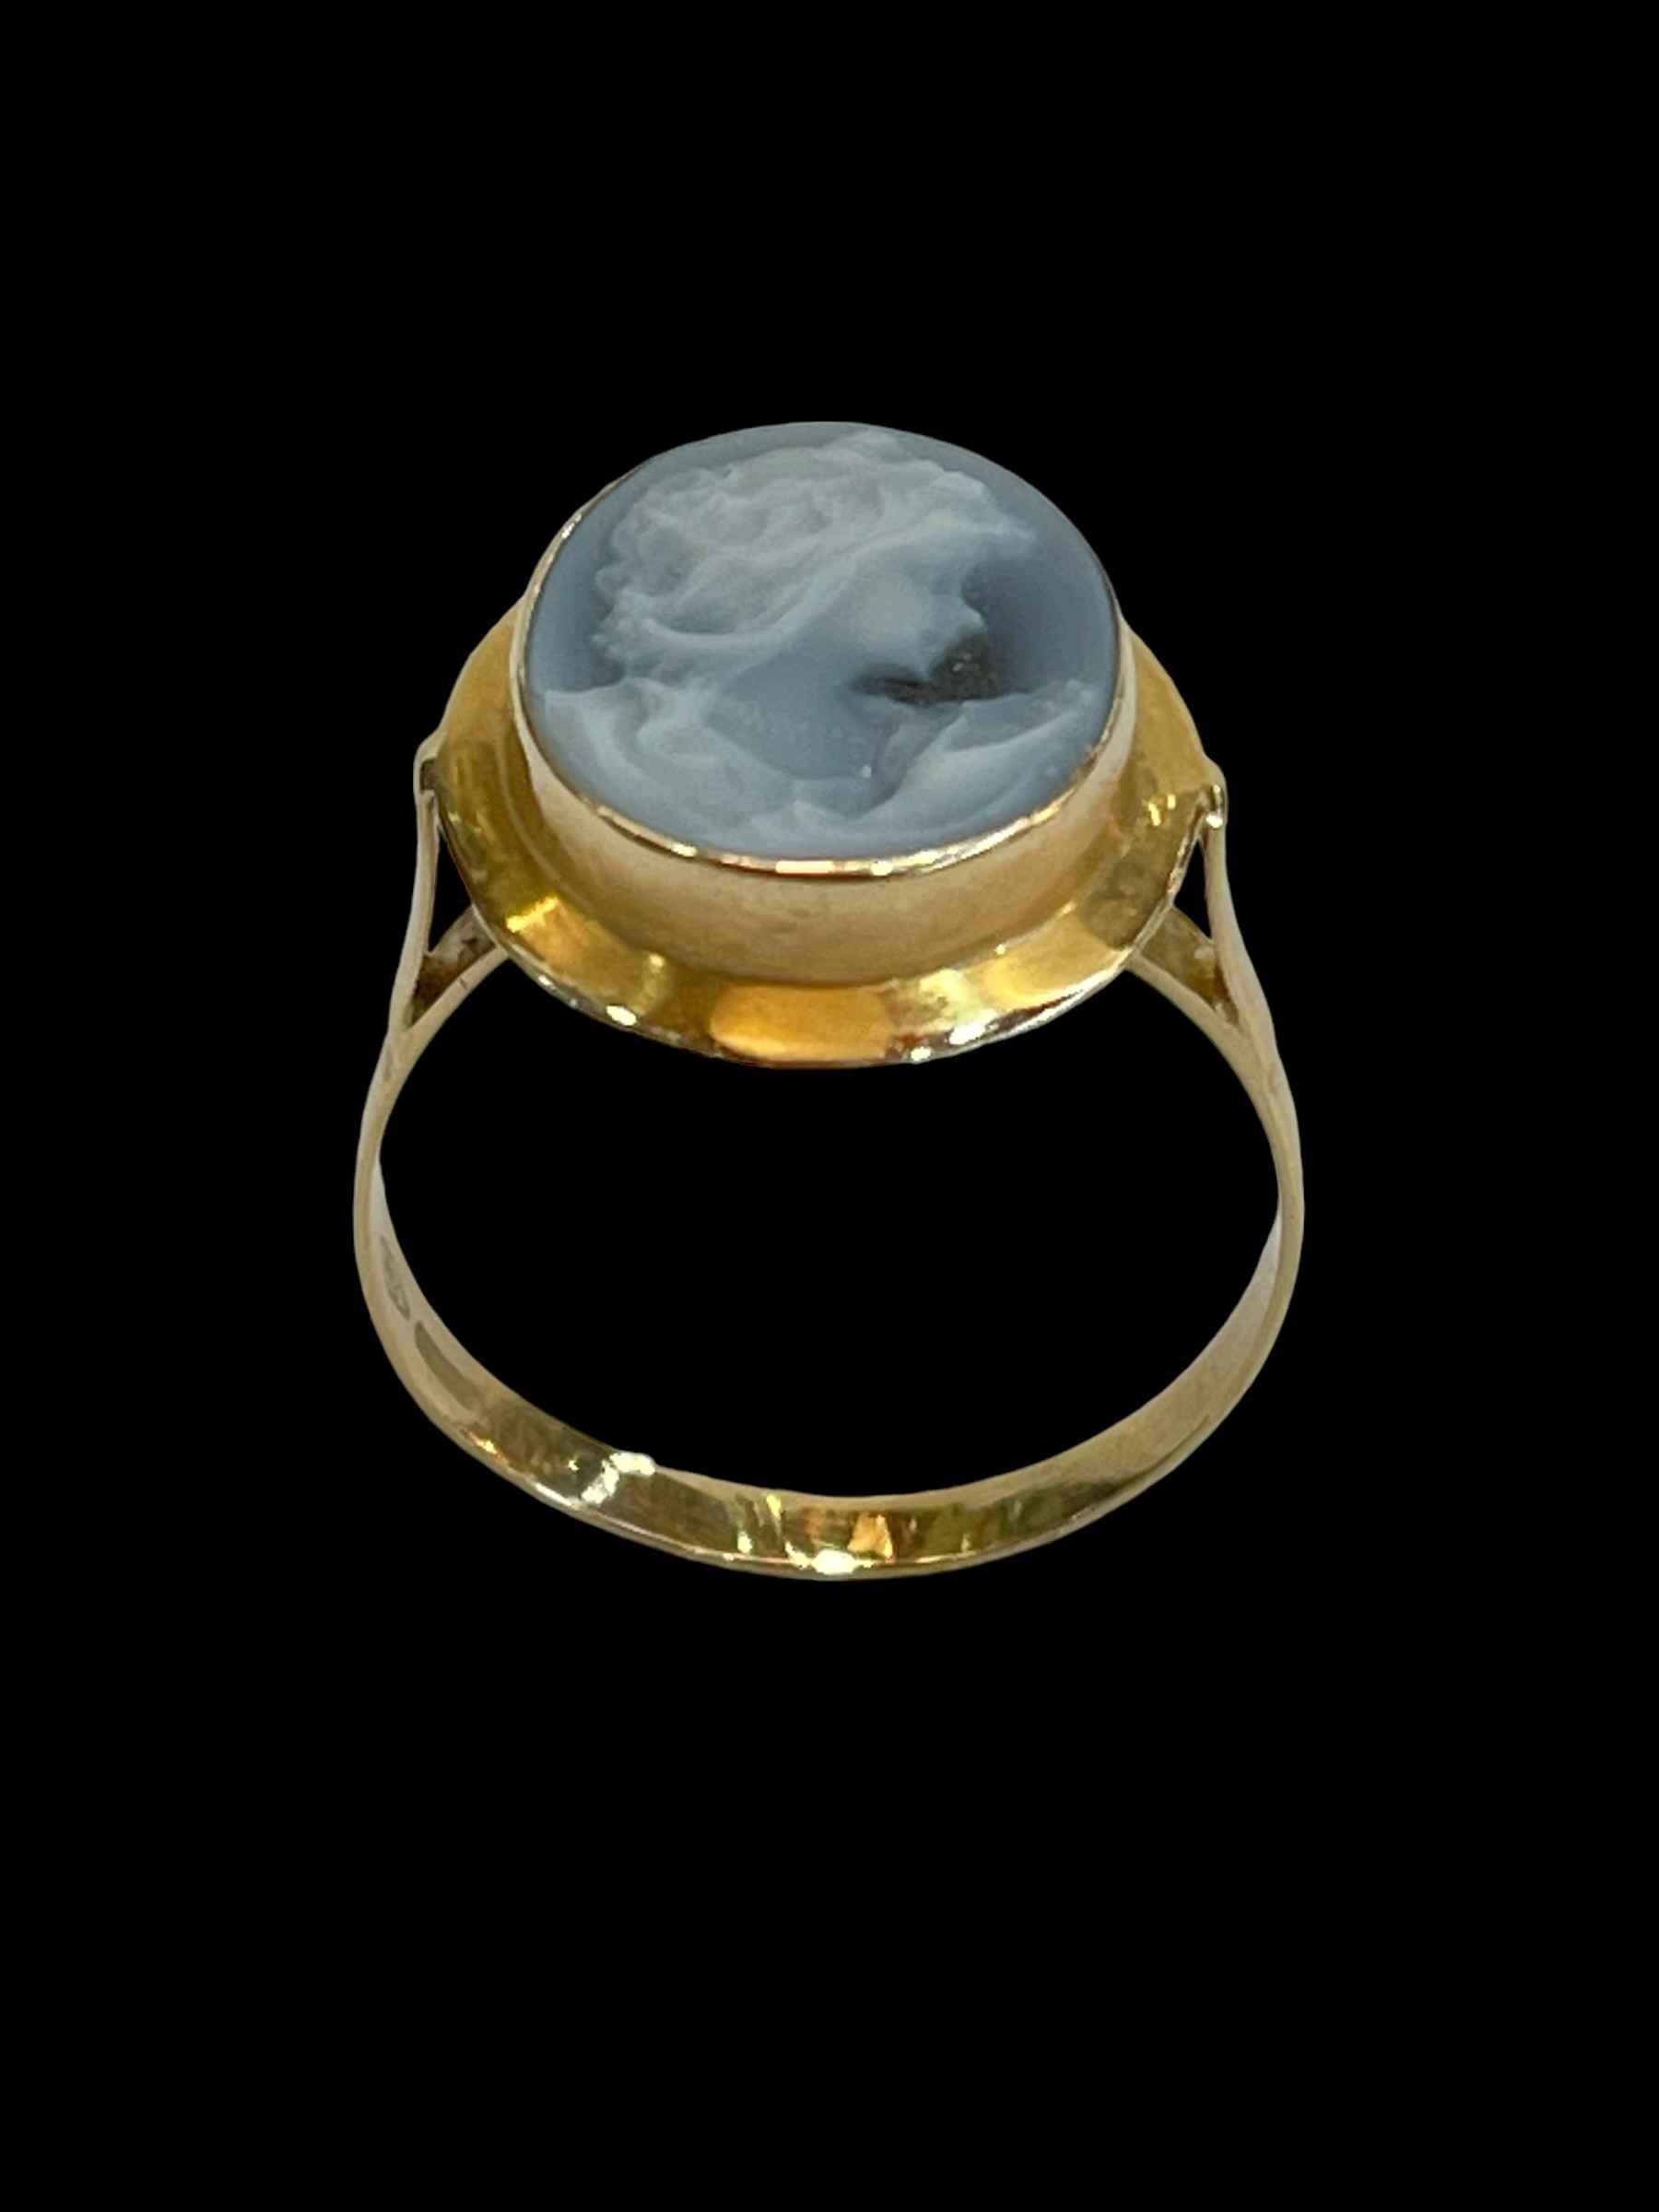 Cameo portrait 18 carat gold ring, size S. - Image 2 of 2